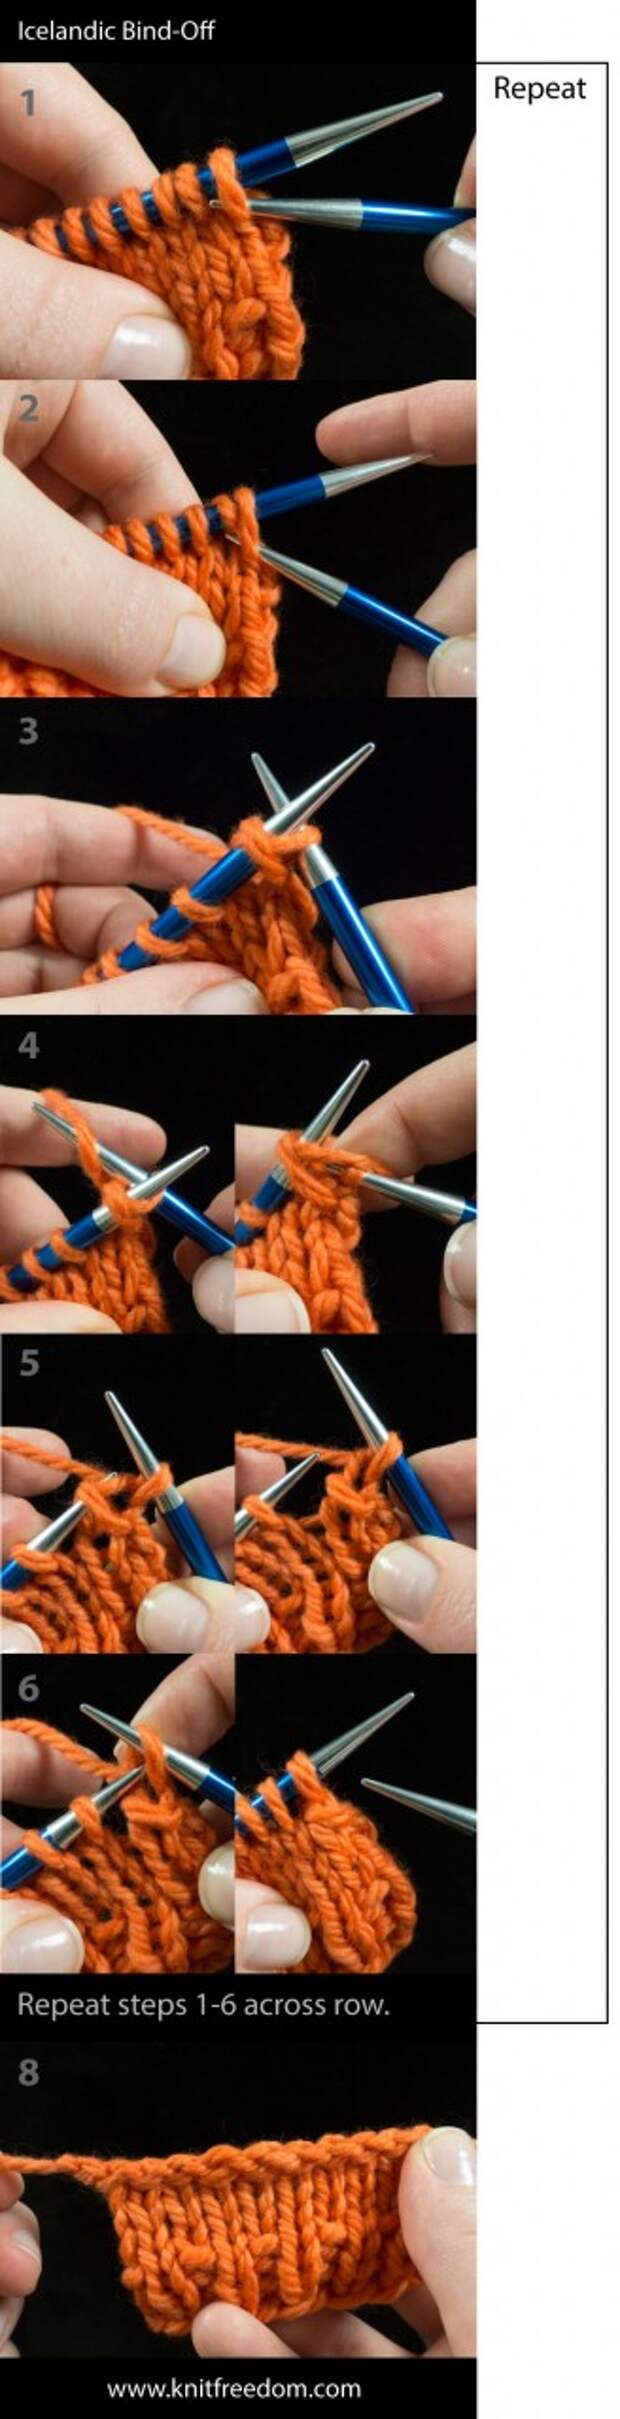 Icelandic Bind-Off Step-by-Step Instructions